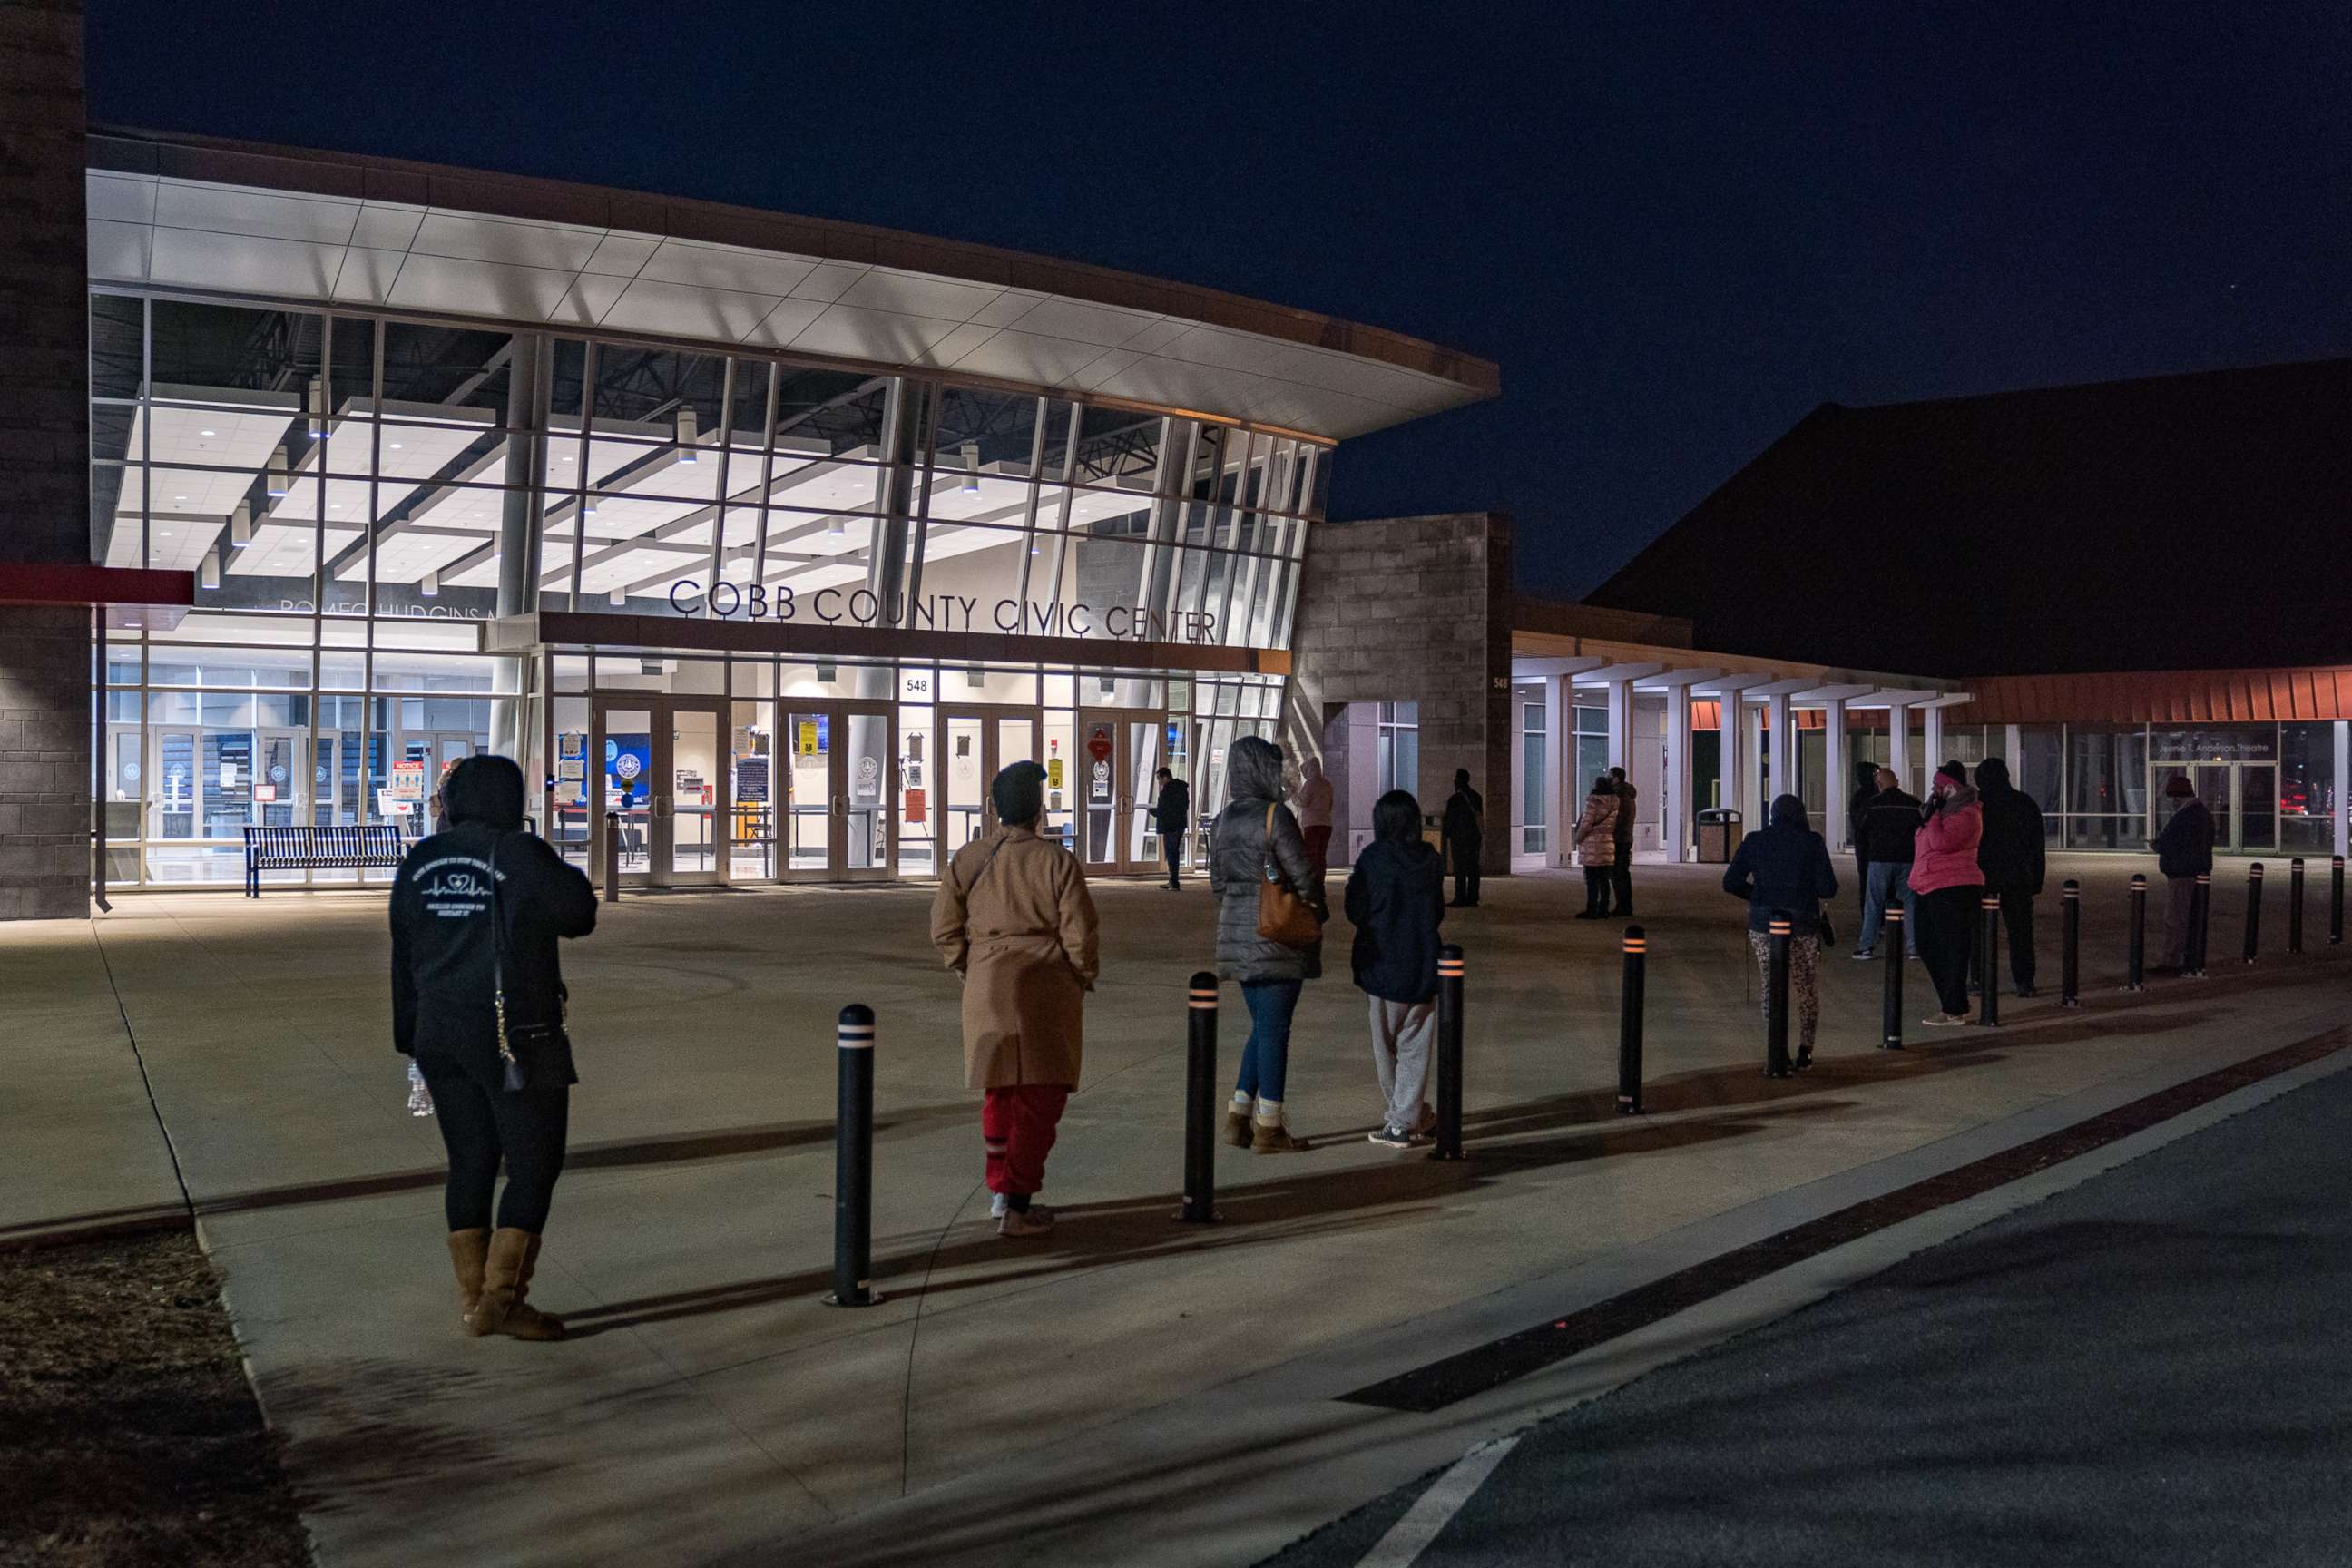 PHOTO: Voters stand in line before the doors open at Cobb County Community Center on Jan. 5, 2021, in Atlanta.